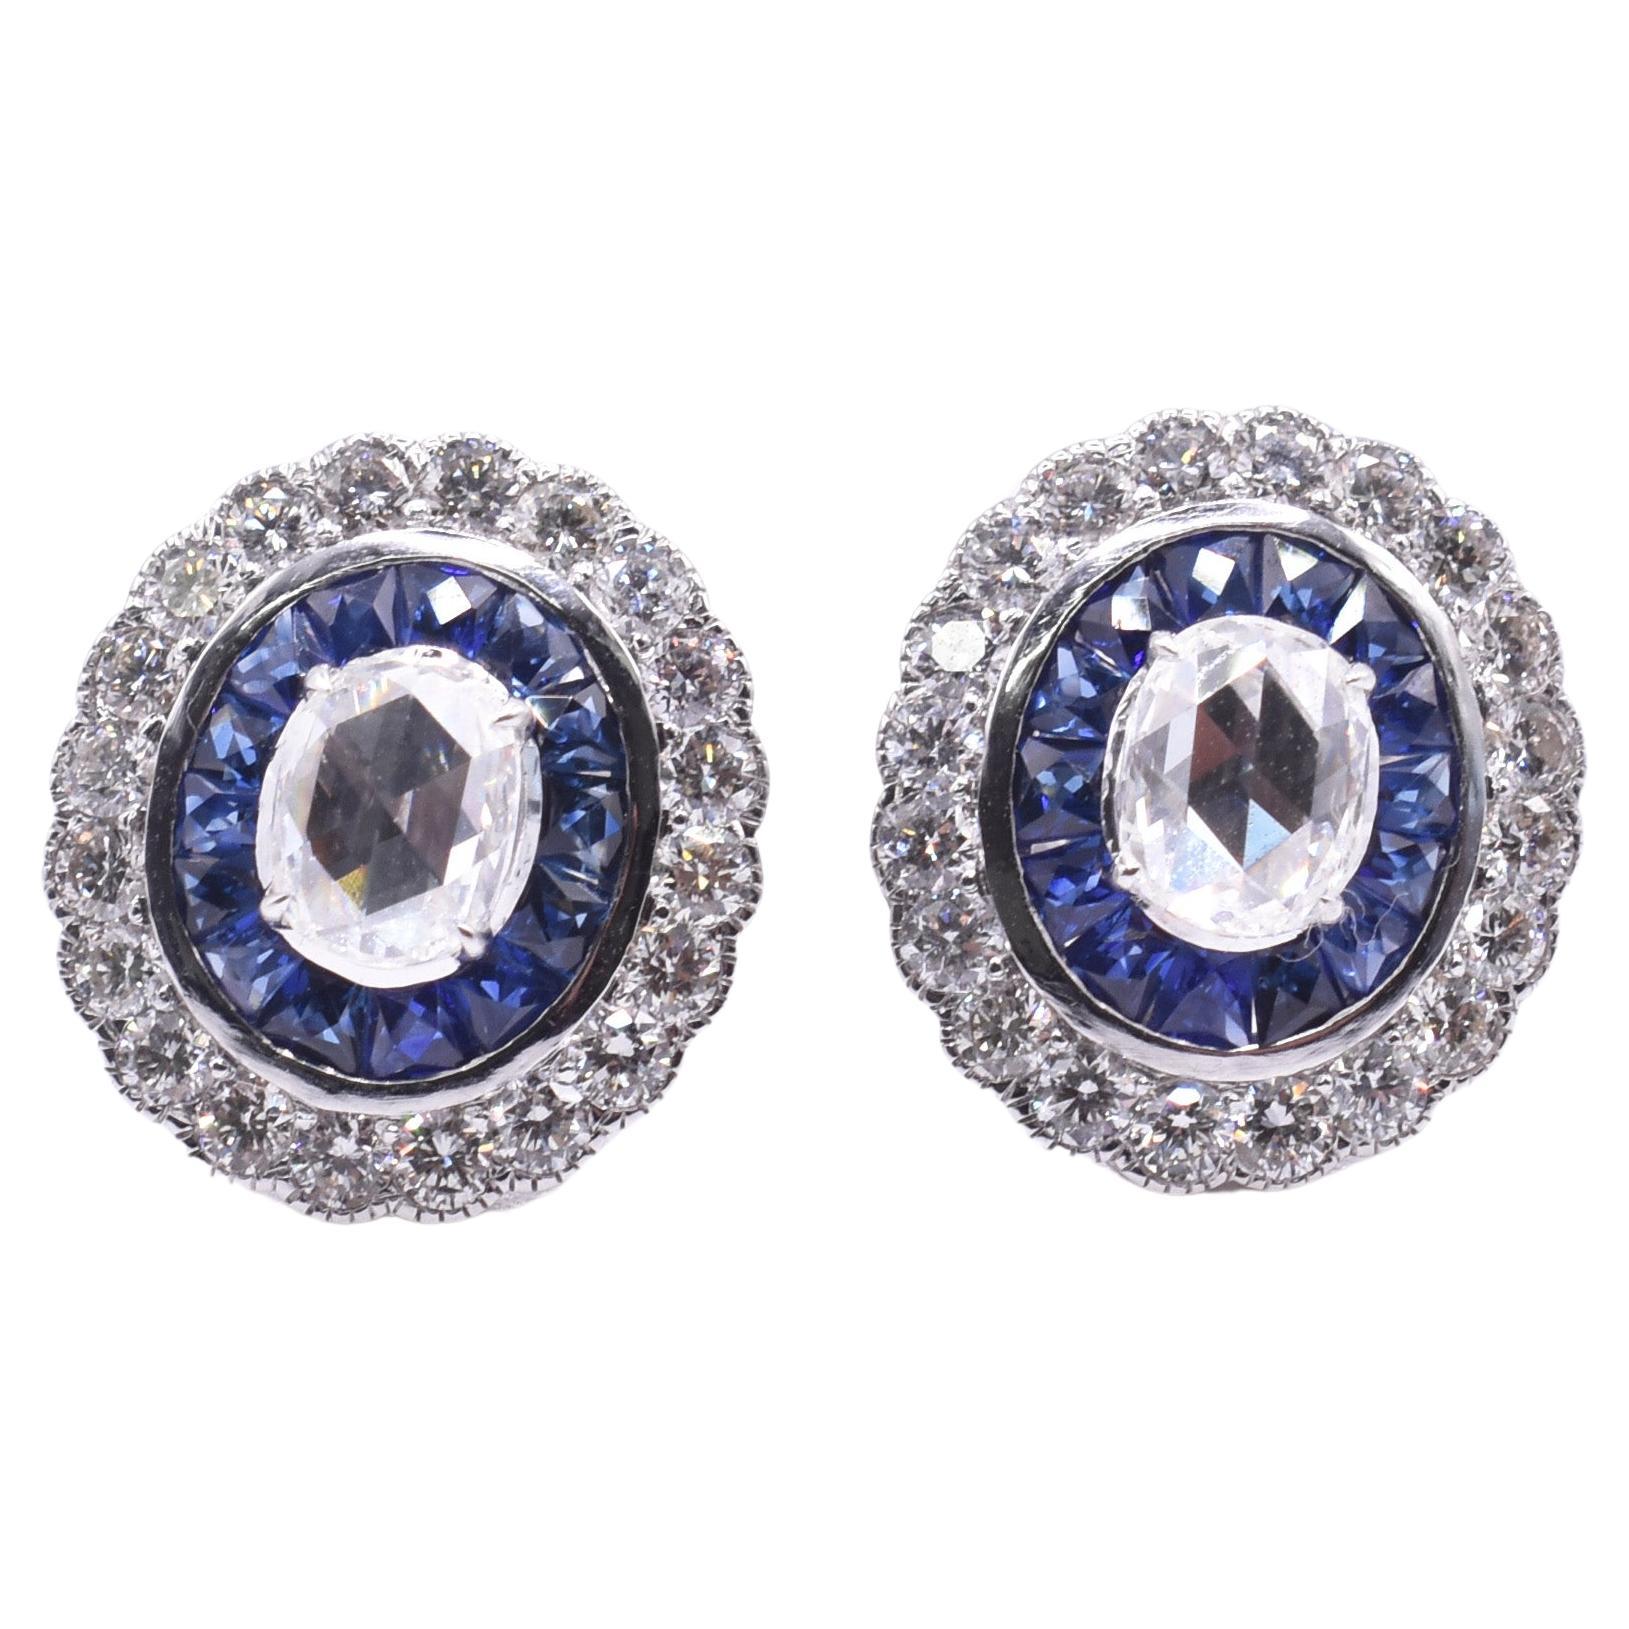 Pair of 18k Art Deco Style White Gold Diamond and Sapphire Stud Earrings